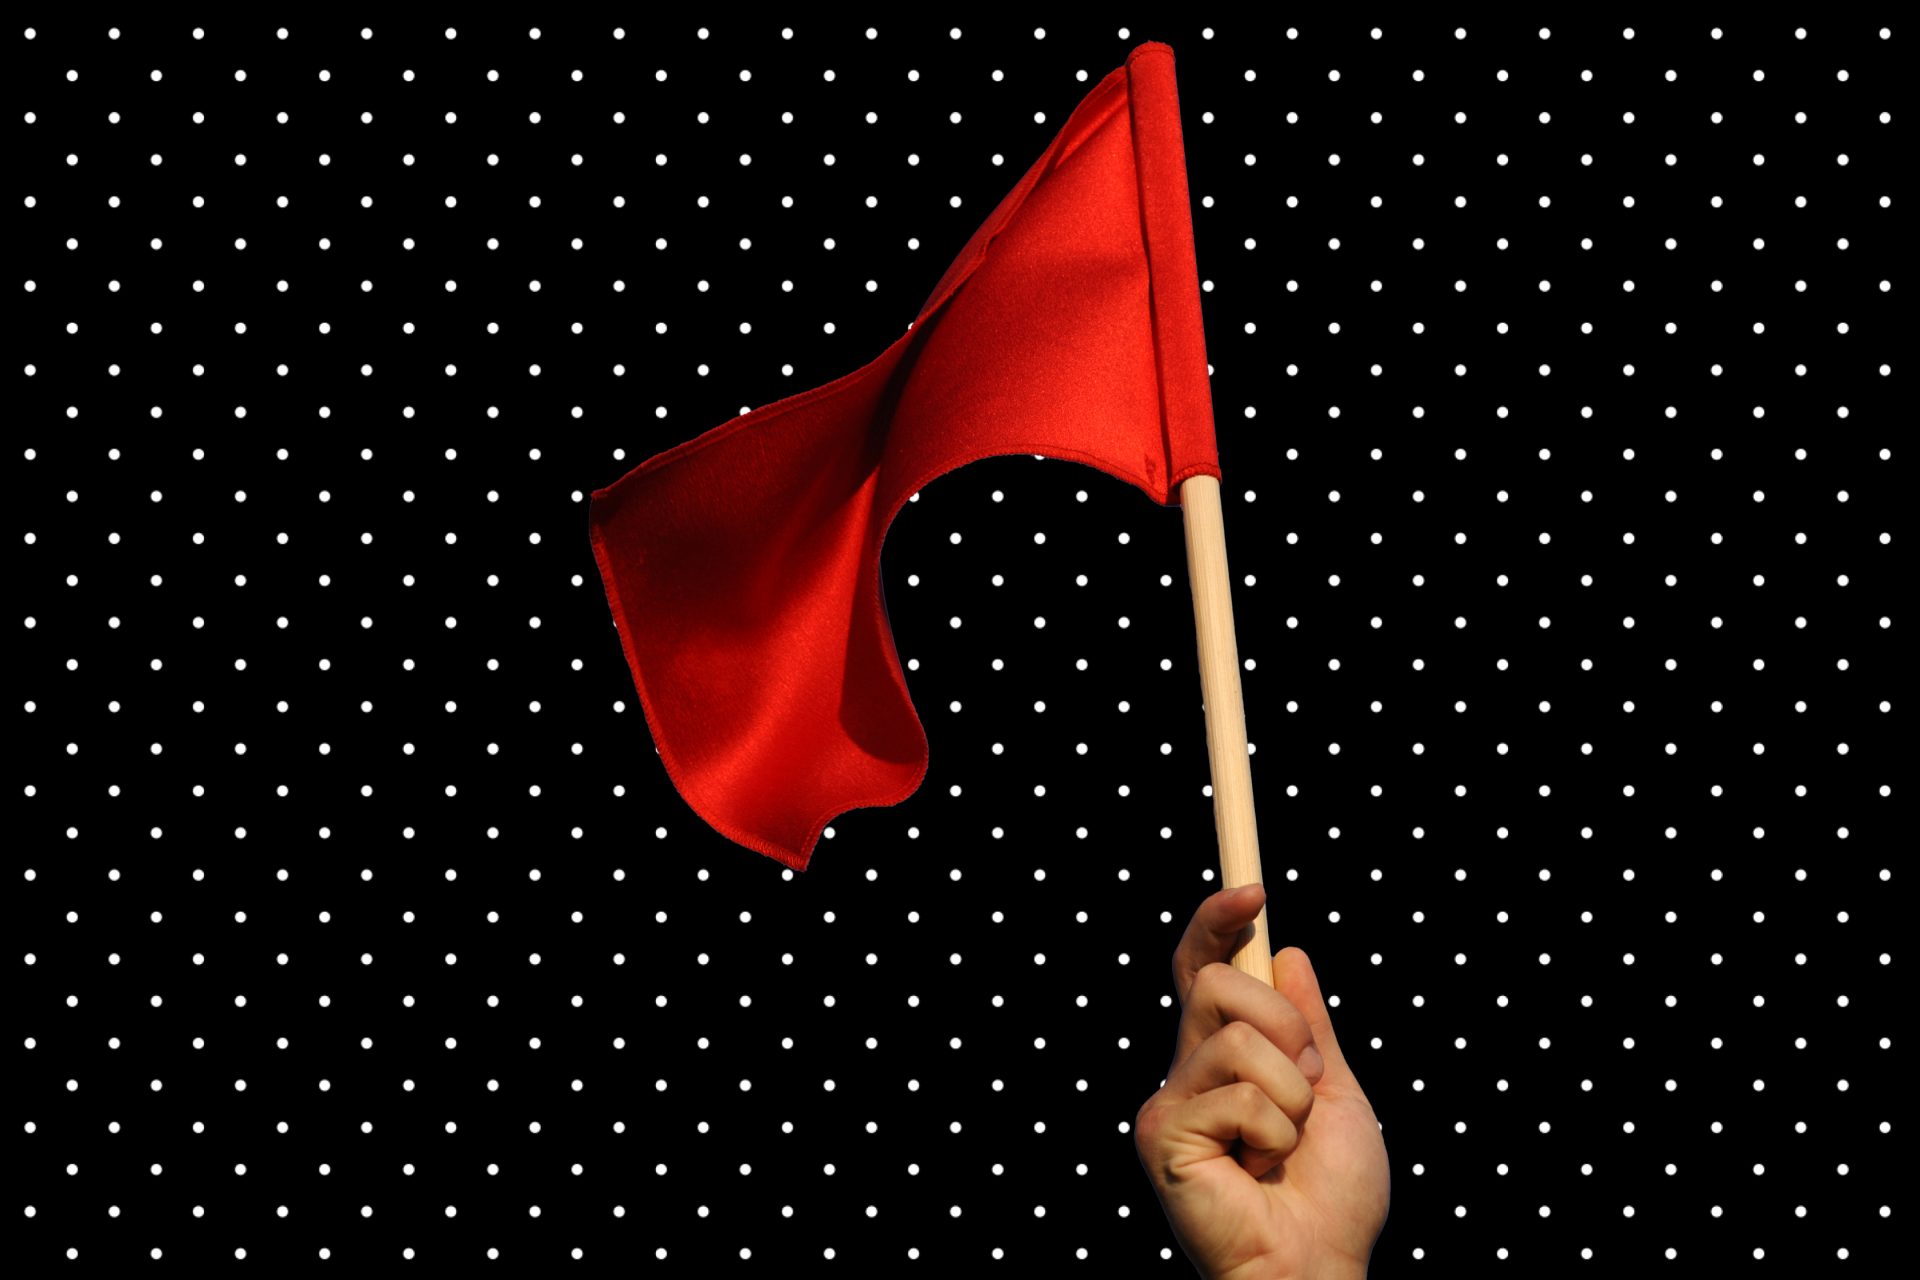 Should we be more aware of red flags in ourselves?